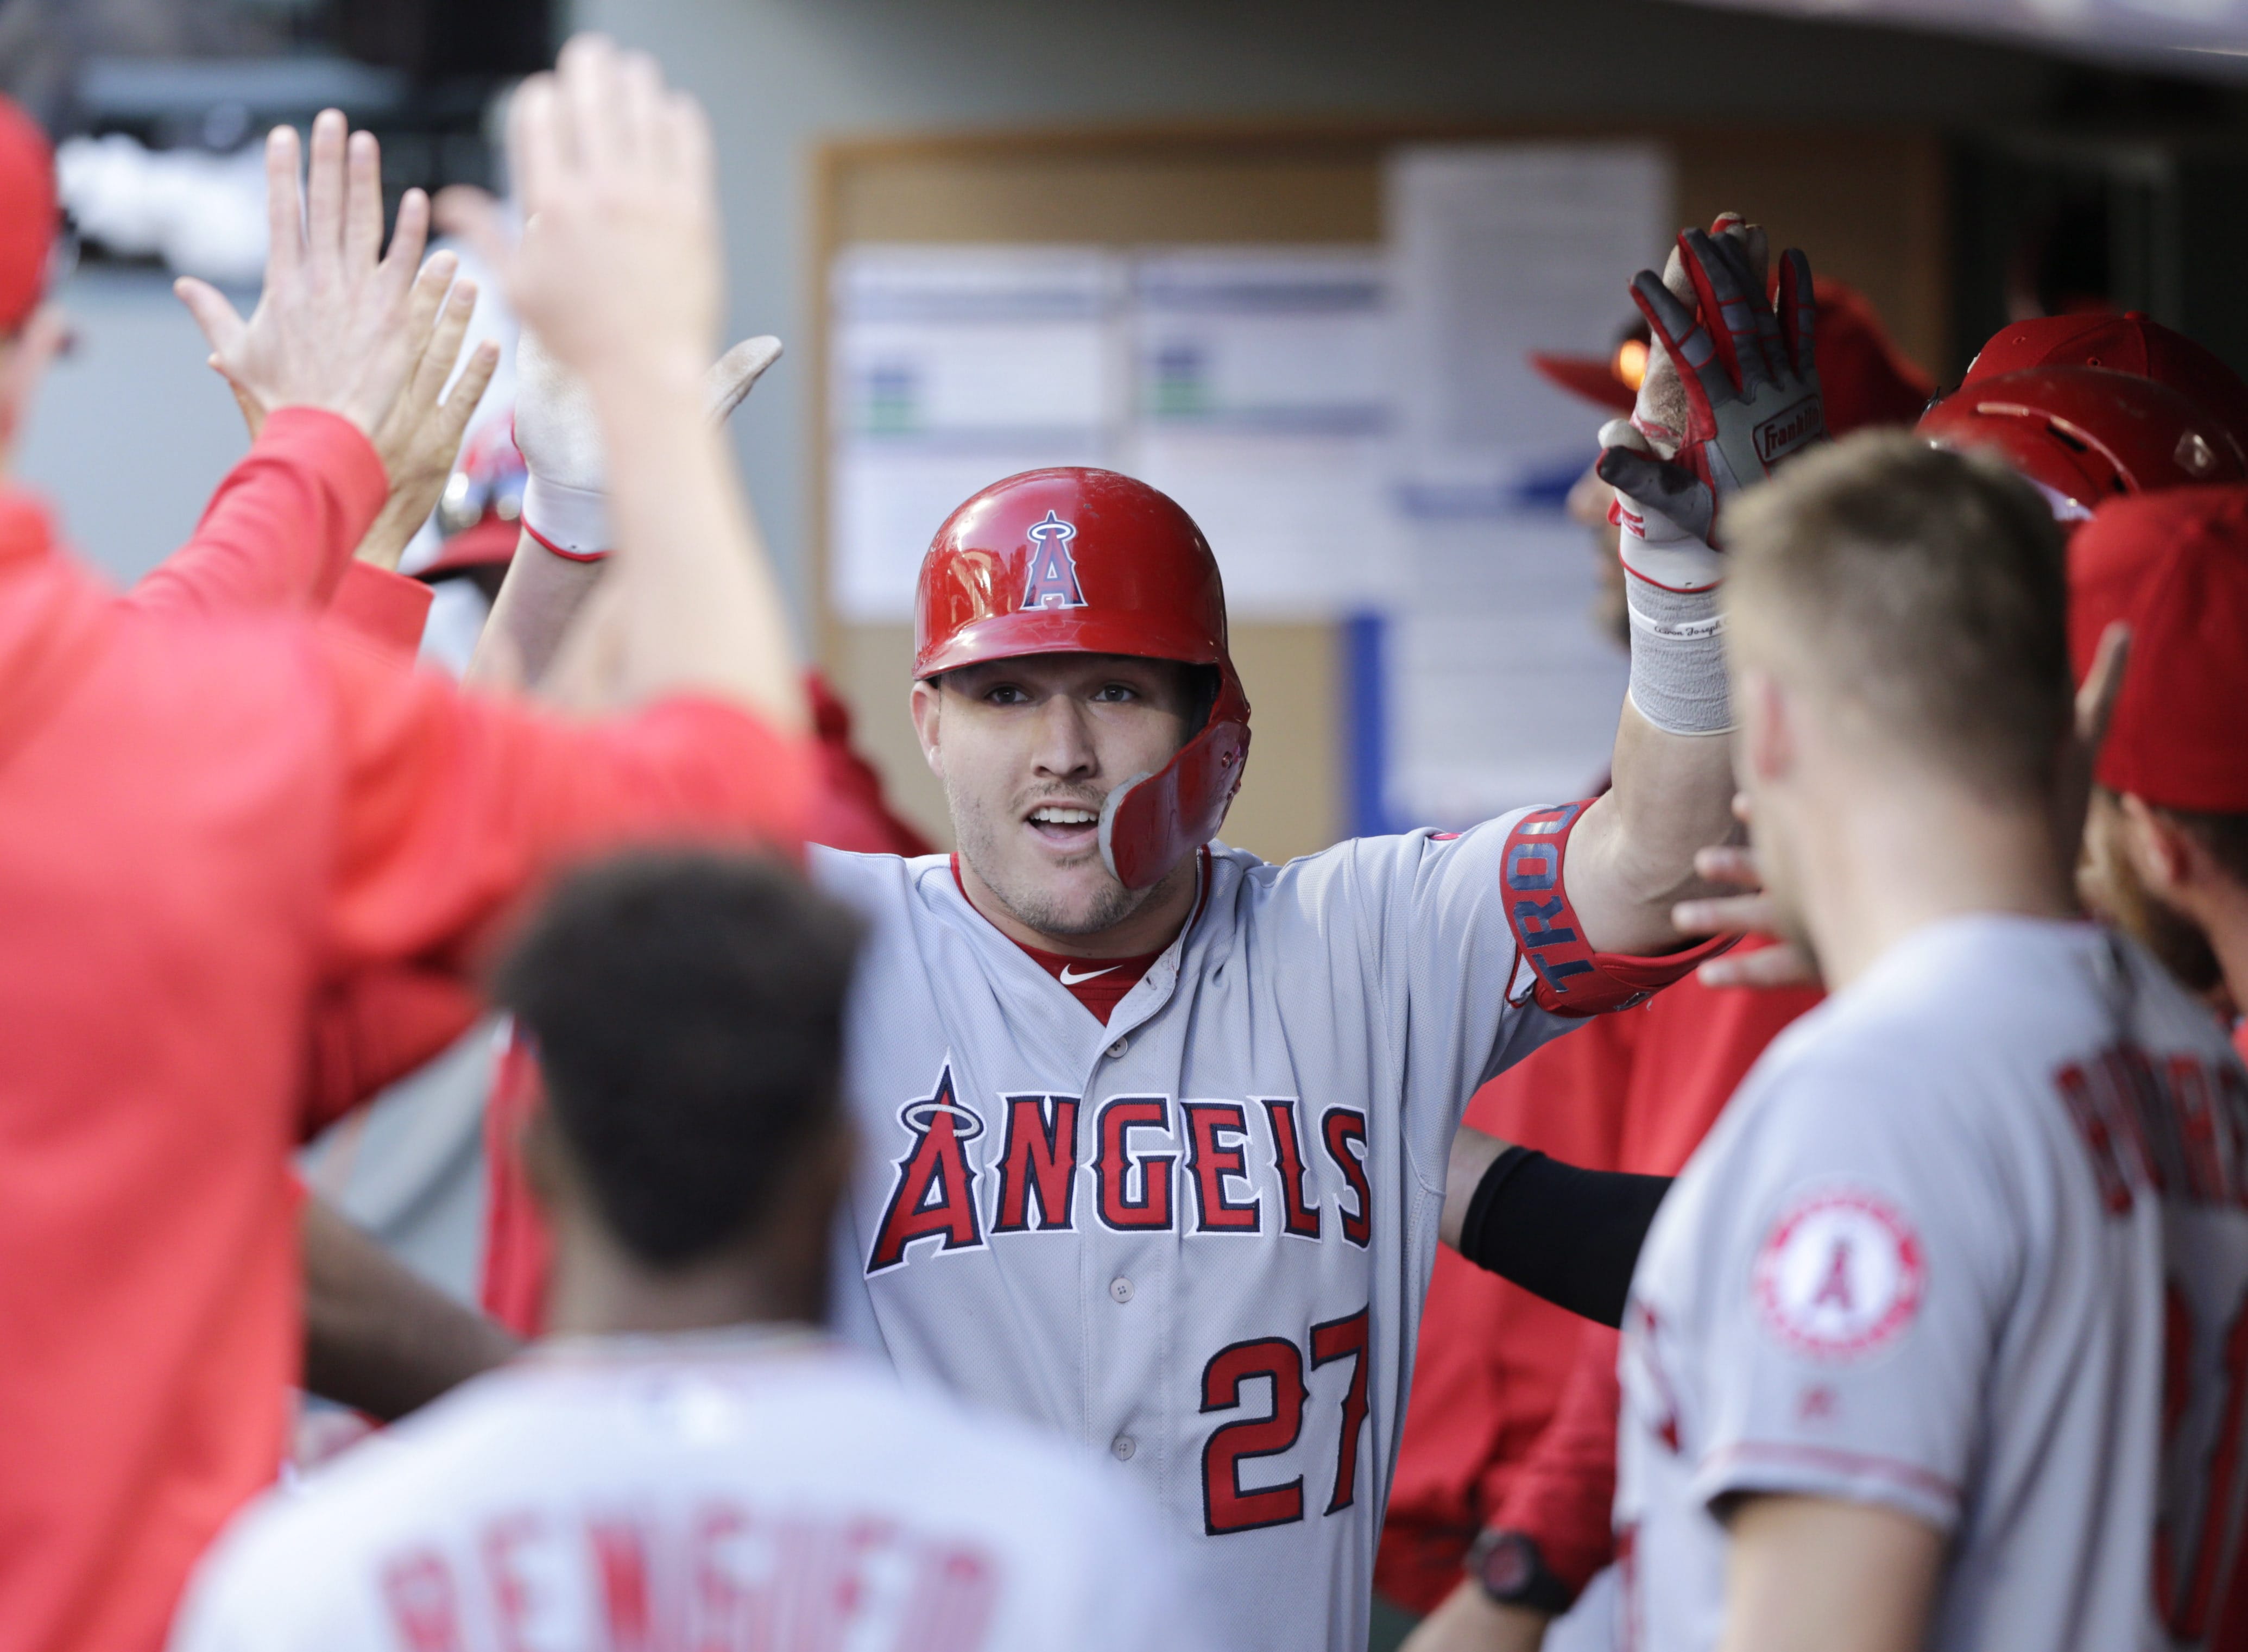 Los Angeles Angels' Mike Trout celebrates in the dugout after hitting a home run against the Seattle Mariners during the ninth inning of a baseball game Saturday, June 1, 2019, in Seattle.